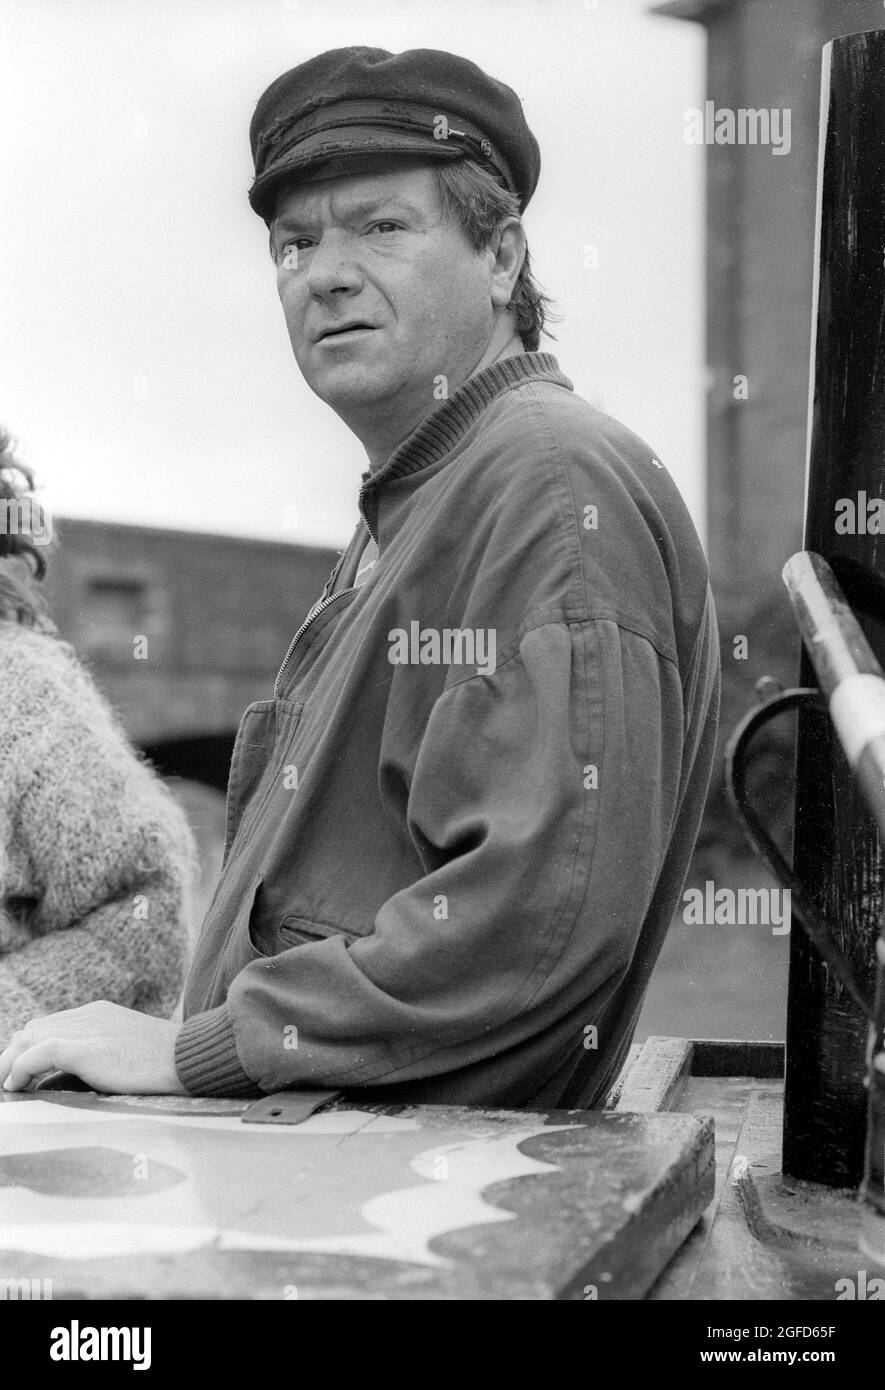 'Cap'n' Michael: actor Michael Elphick as BOON the leading character for the Central TV series BOON in 1985 takes time of from filming to enjoy the life on narrow boat canal craft as he learns to navigate the craft through the Birmingham canal system. Stock Photo